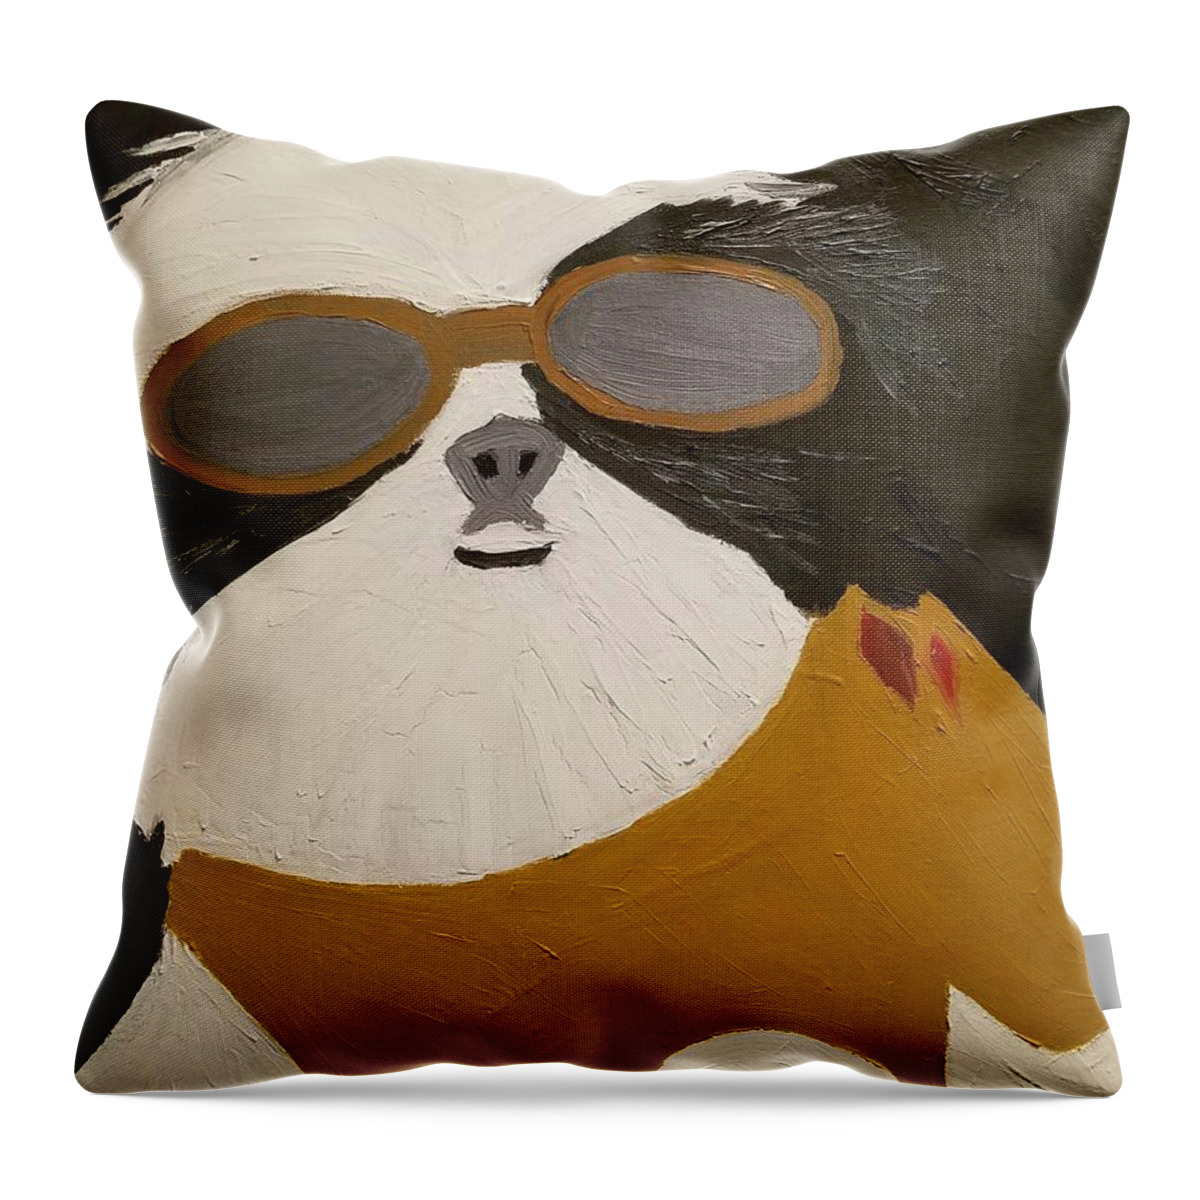 Shih-tzu Throw Pillow featuring the painting Dog Boss by J Cv